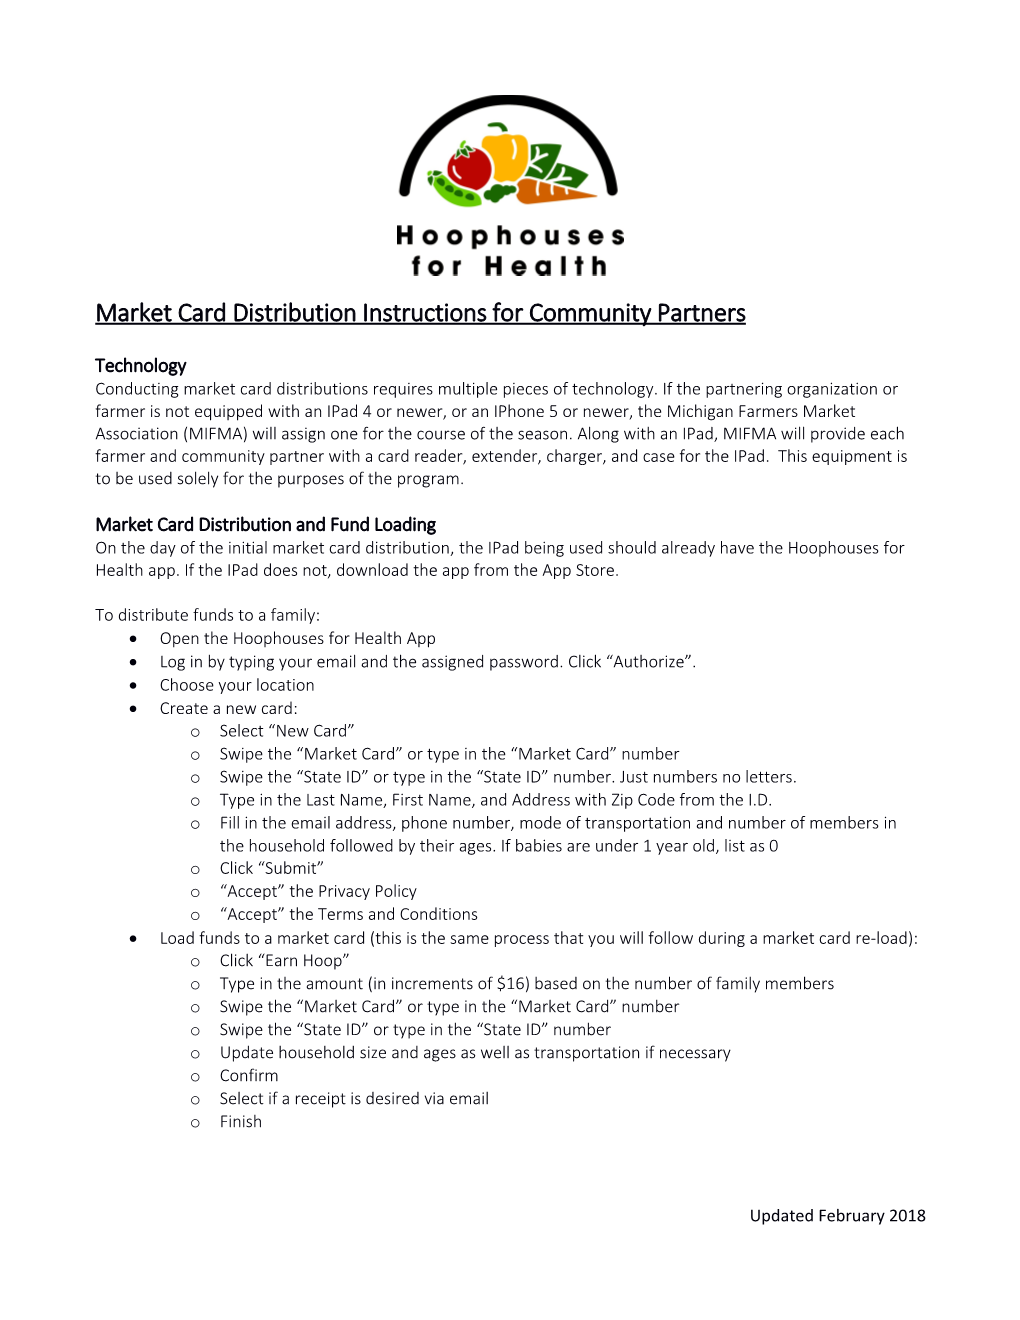 Market Card Distribution Instructions for Community Partners